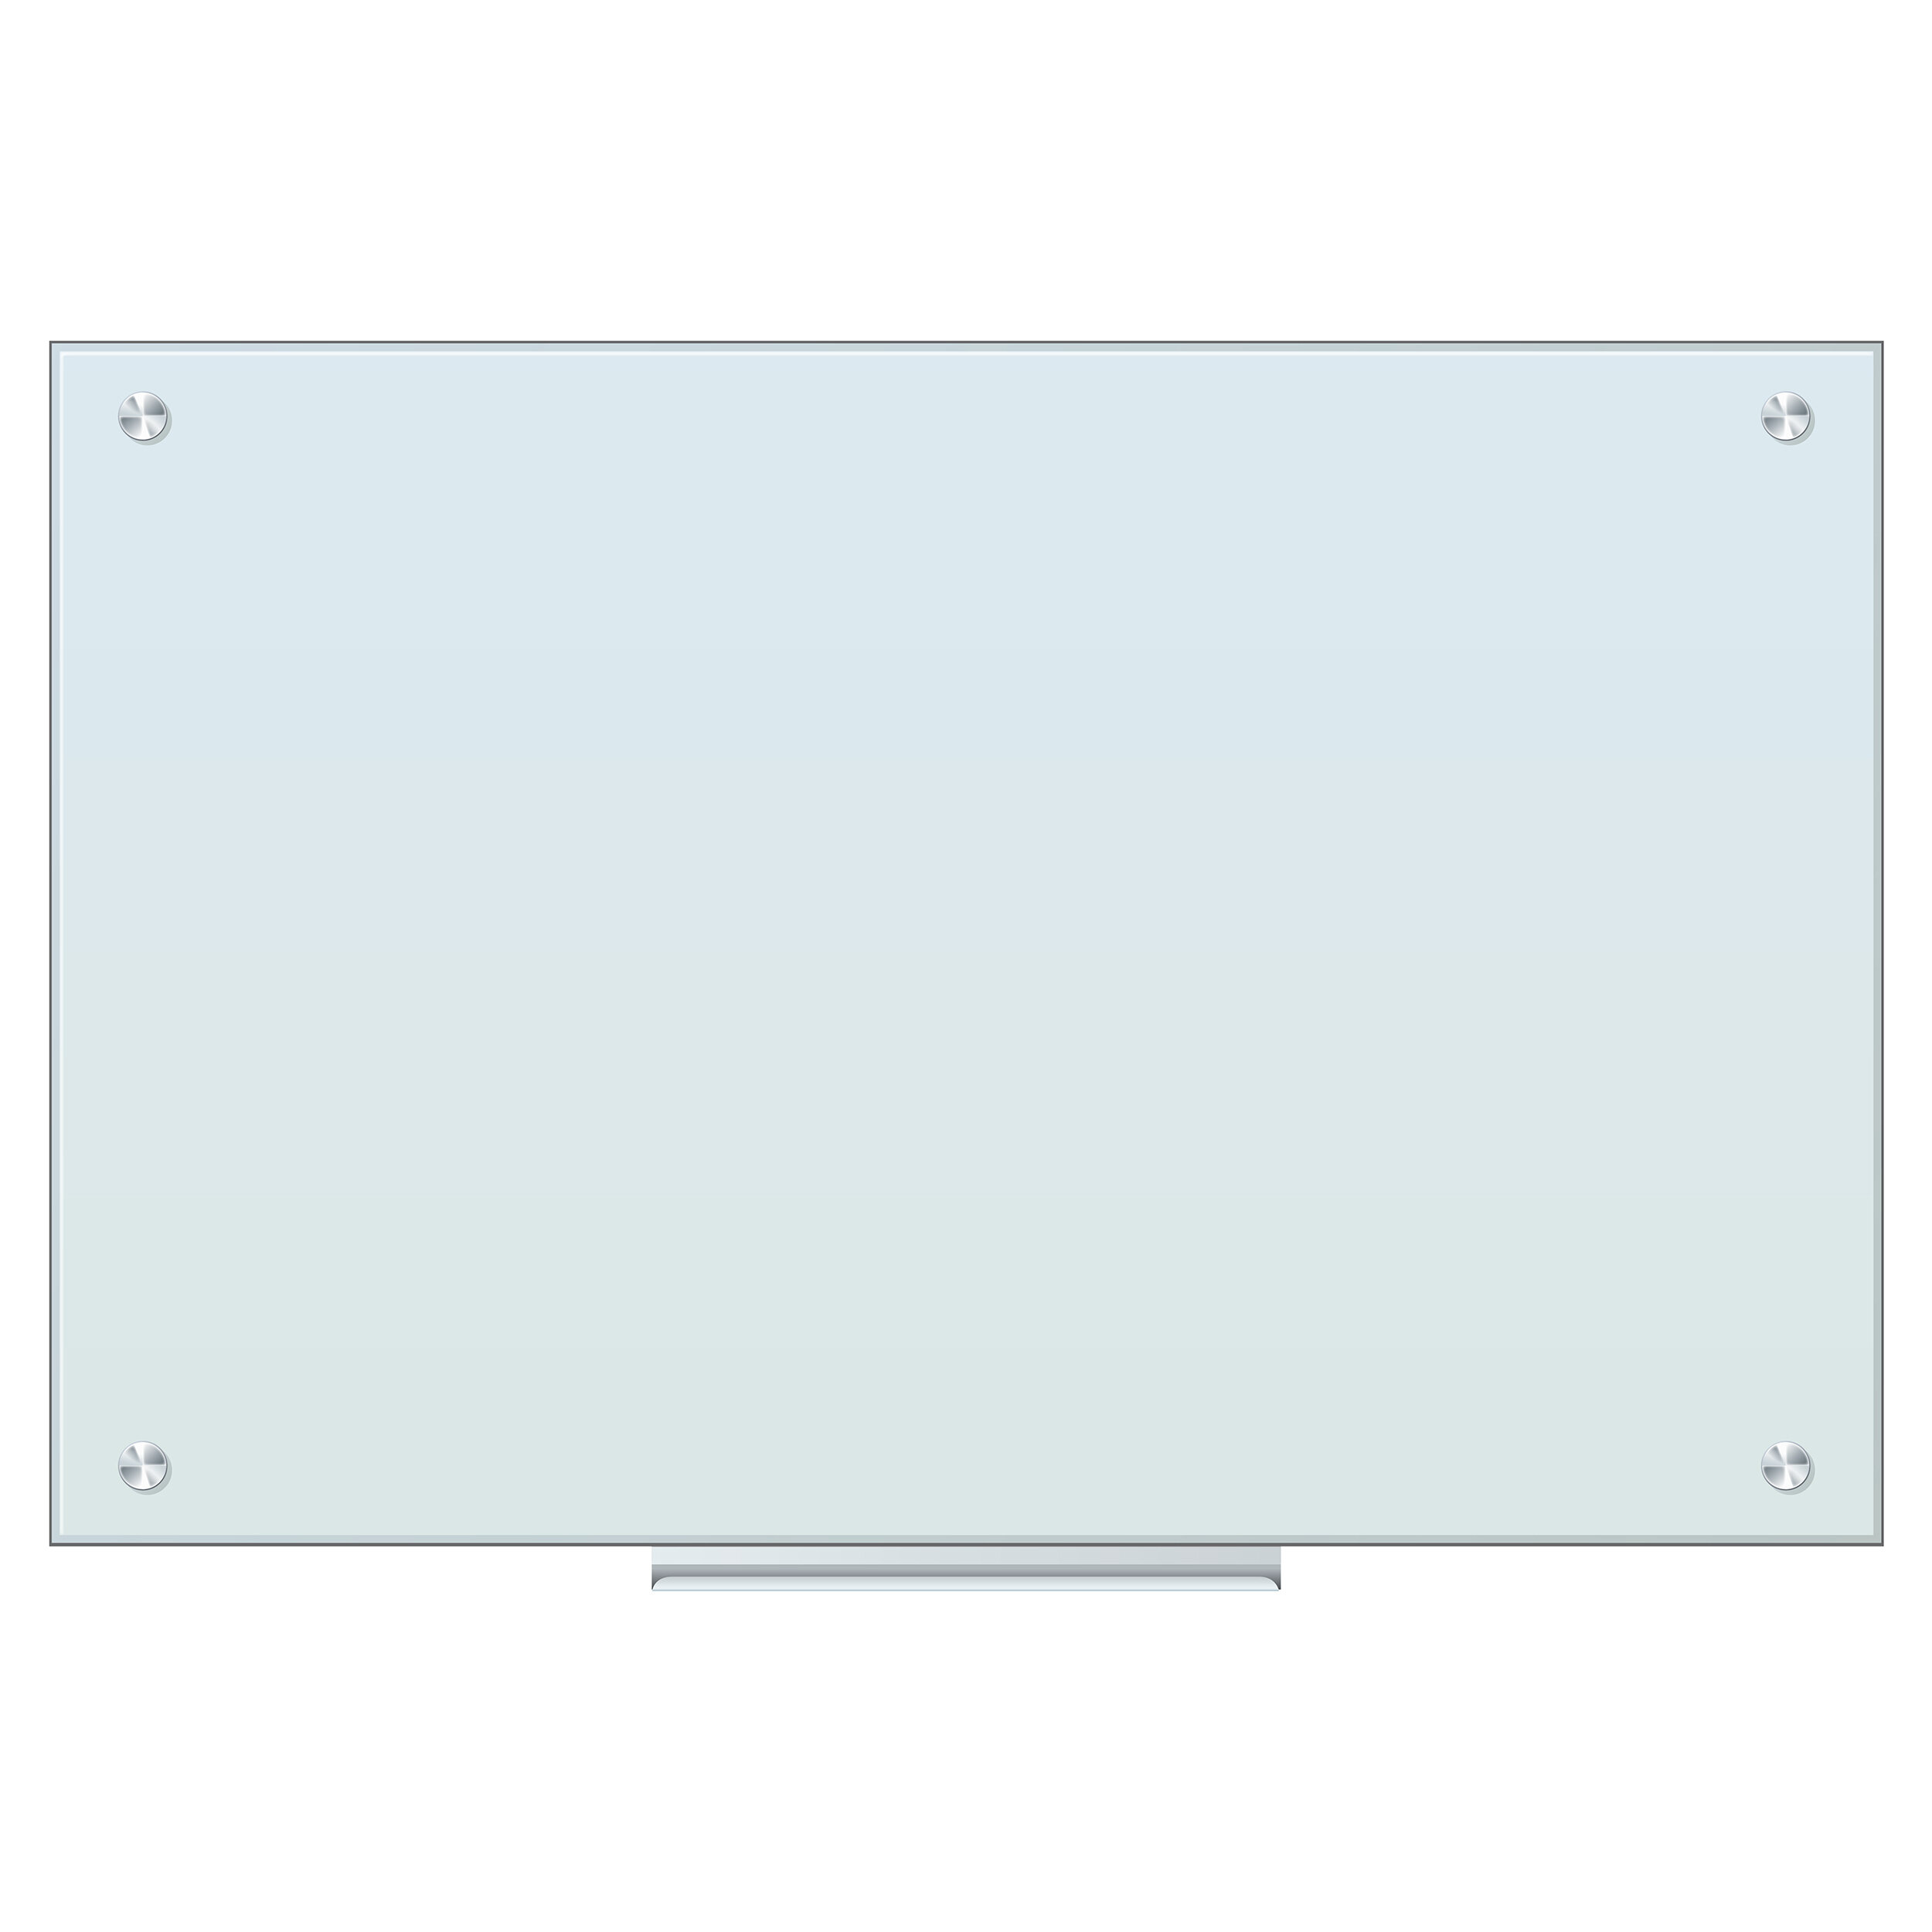 Magnetic Glass Whiteboard 4 THOUGHT 24 x 18 Inches Dry Erase Board Wall-Mounted Frameless Glass Board 3 Magnets Included White Surface 